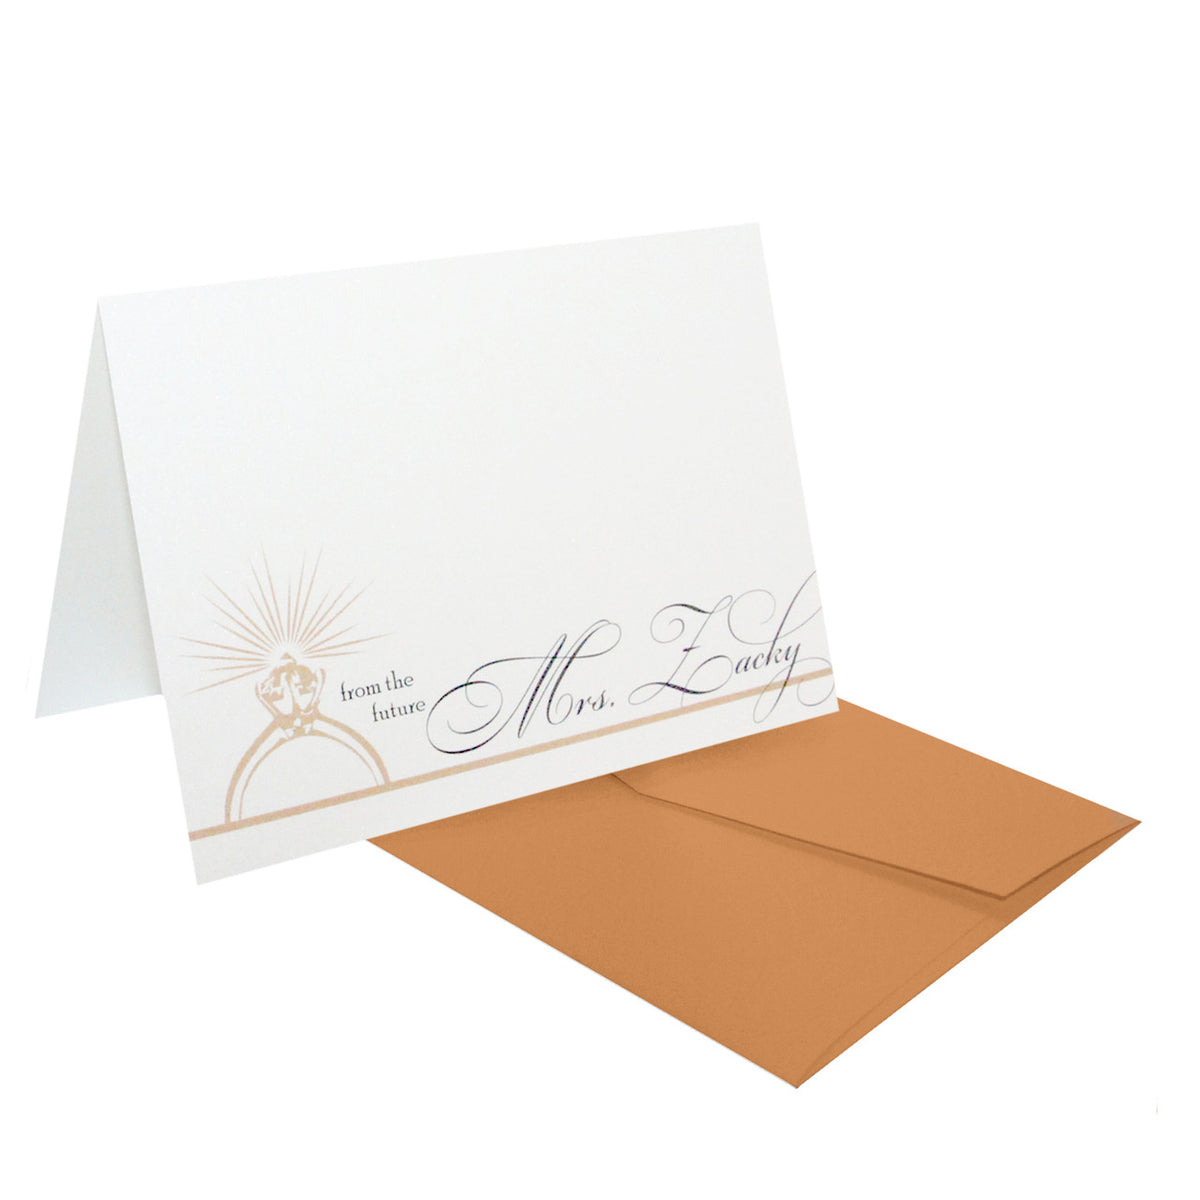 From the Future Mrs. Personalized Stationery - RSVP Style